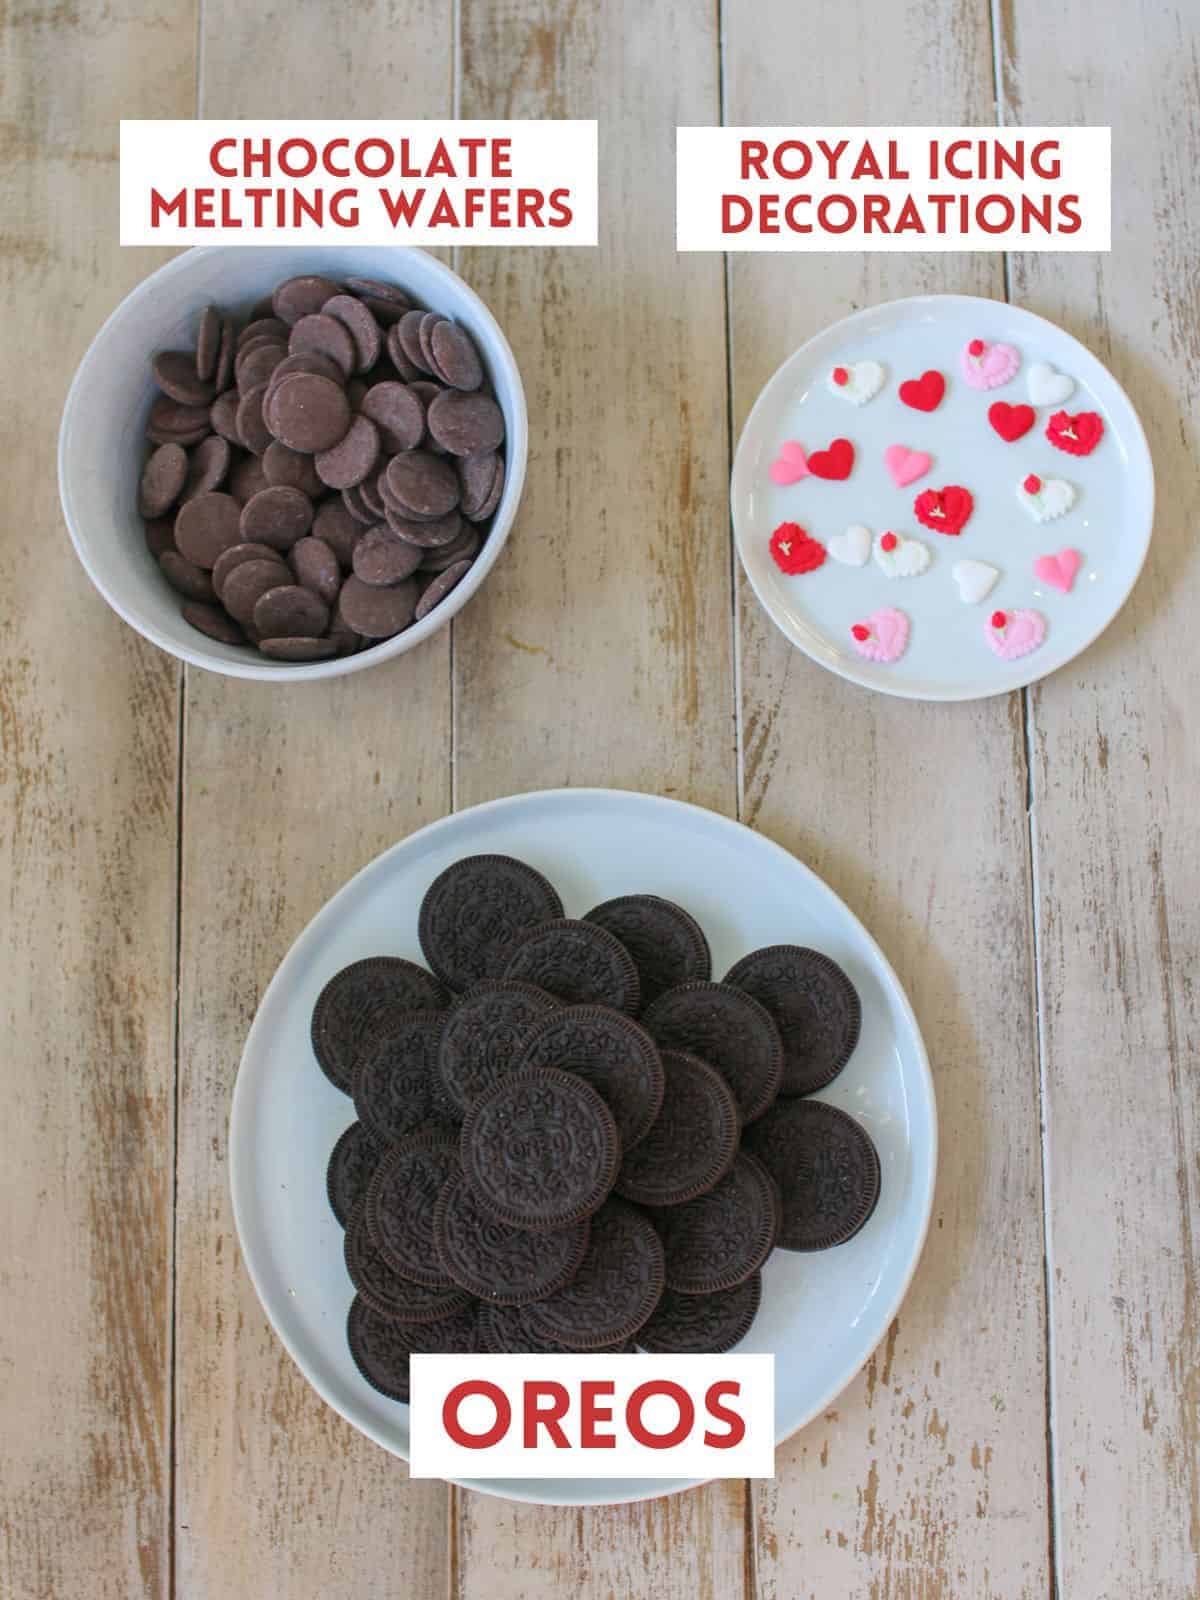 A white plate with oreos stacked, a smaller white plate with a variety of heart royal icing pieces and bowl of chocolate melting wafers. Each item is labeled with a white rectangle box with text in all caps in dark red on a light wood plank background.